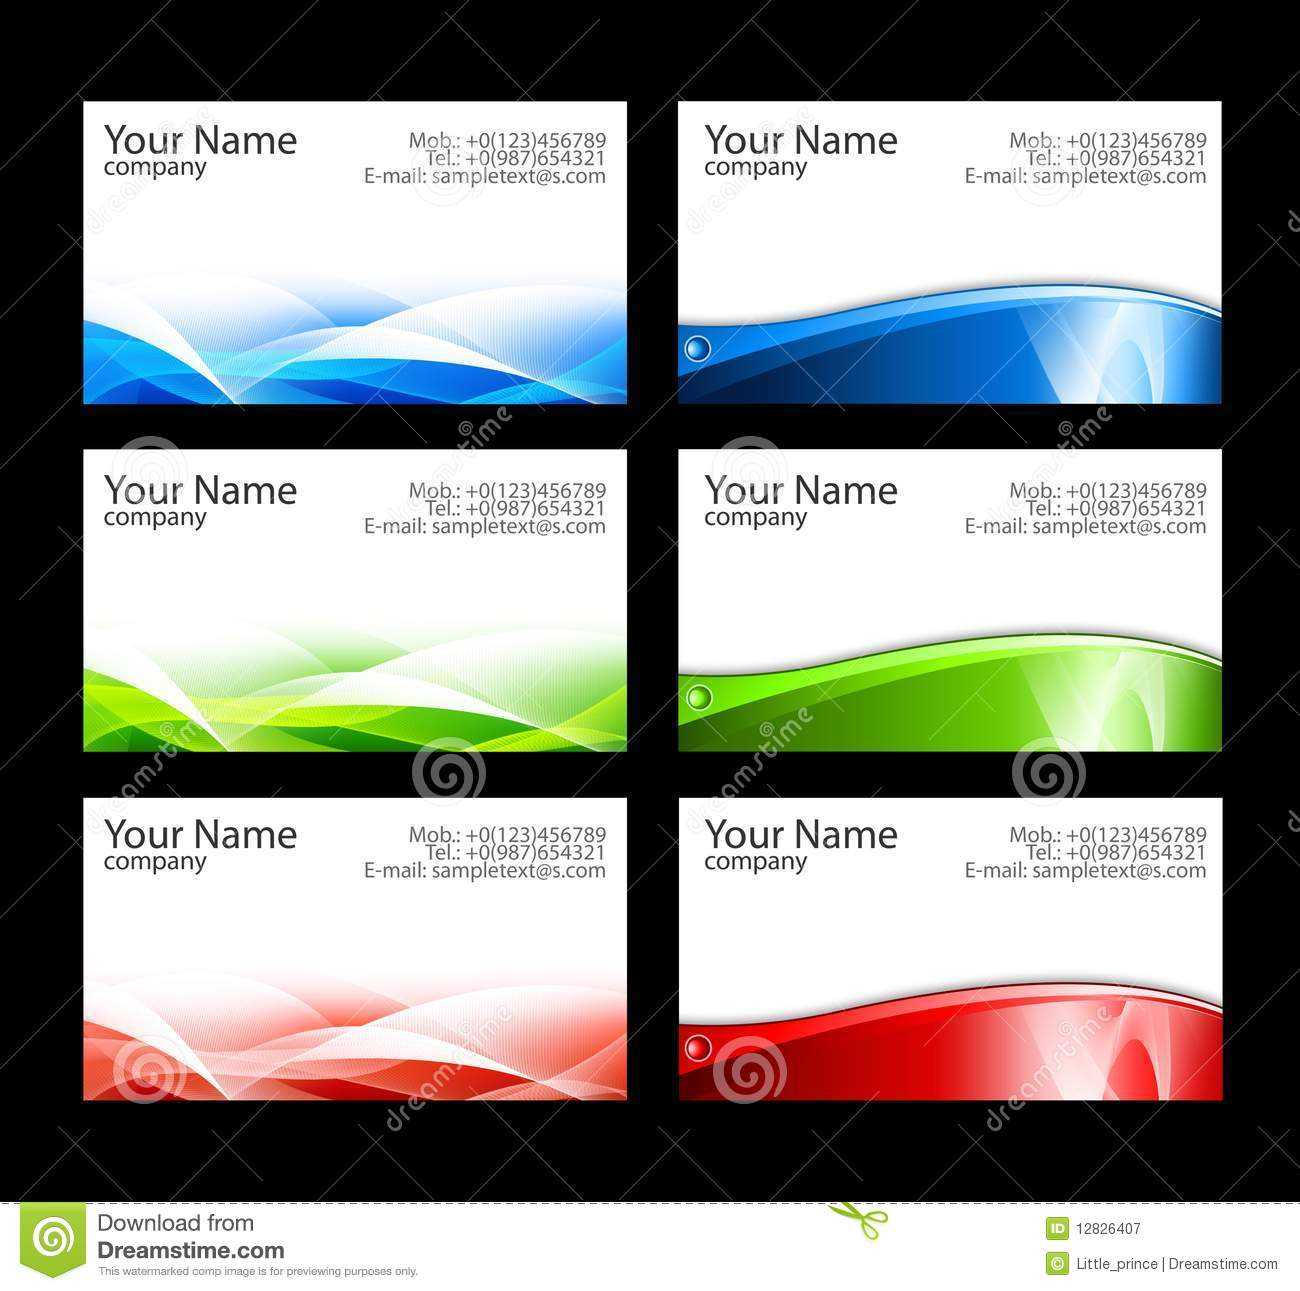 Business Cards Templates Stock Illustration. Illustration Of With Regard To Free Business Cards Templates For Word